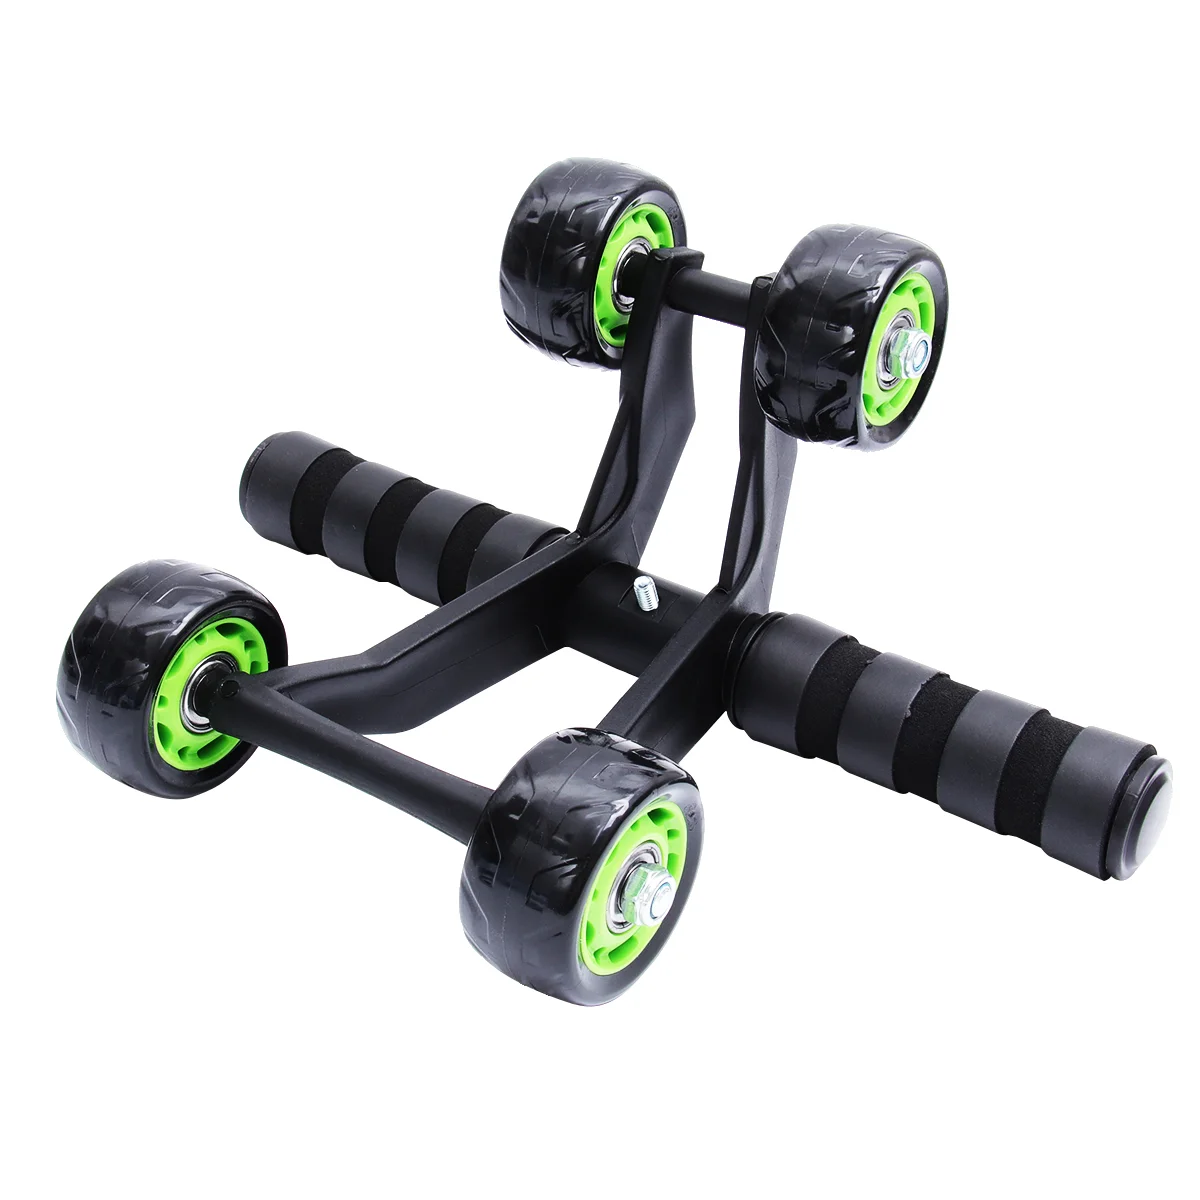 

Roller Wheel Workout Wheel Exercise Ab Wheel Roller Automatic Four Wheels with Mat for Home Gym Abdominal Muscle Exerciser (